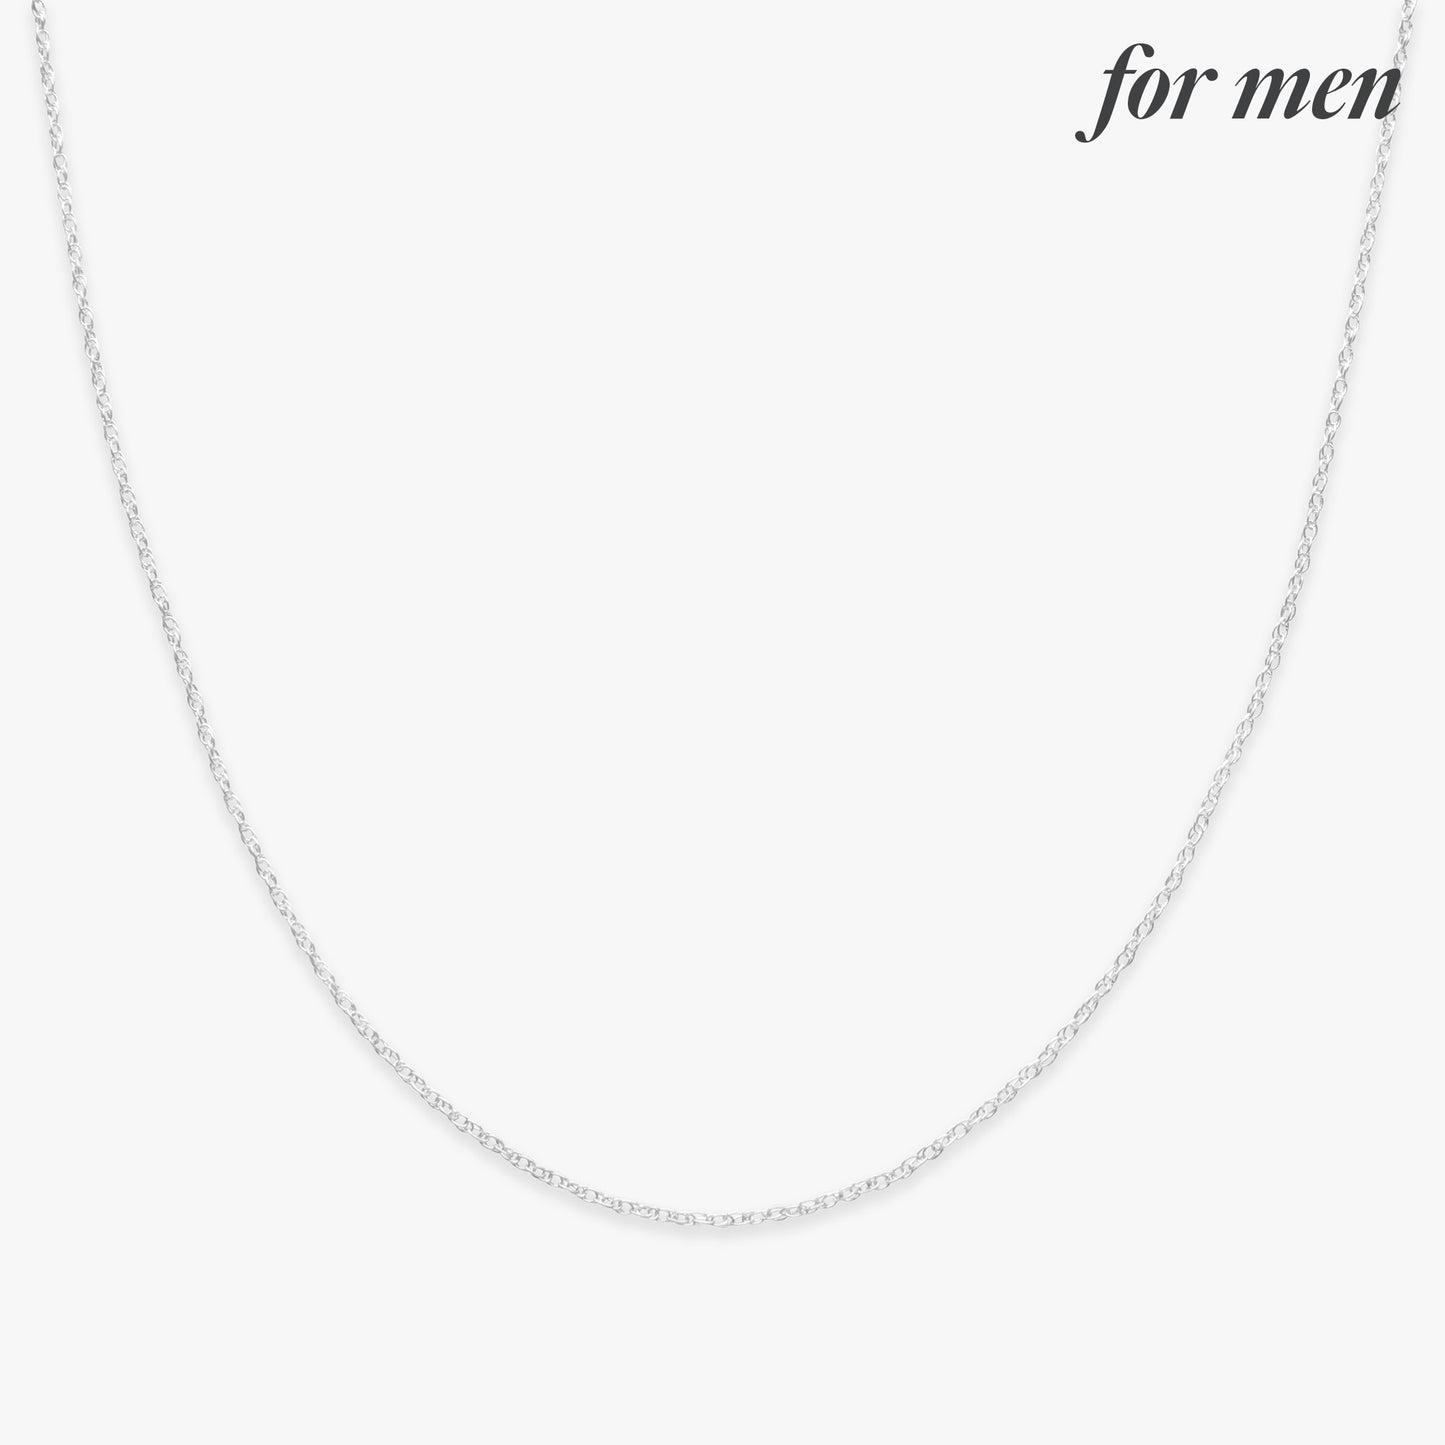 Basic twist chain necklace silver for men